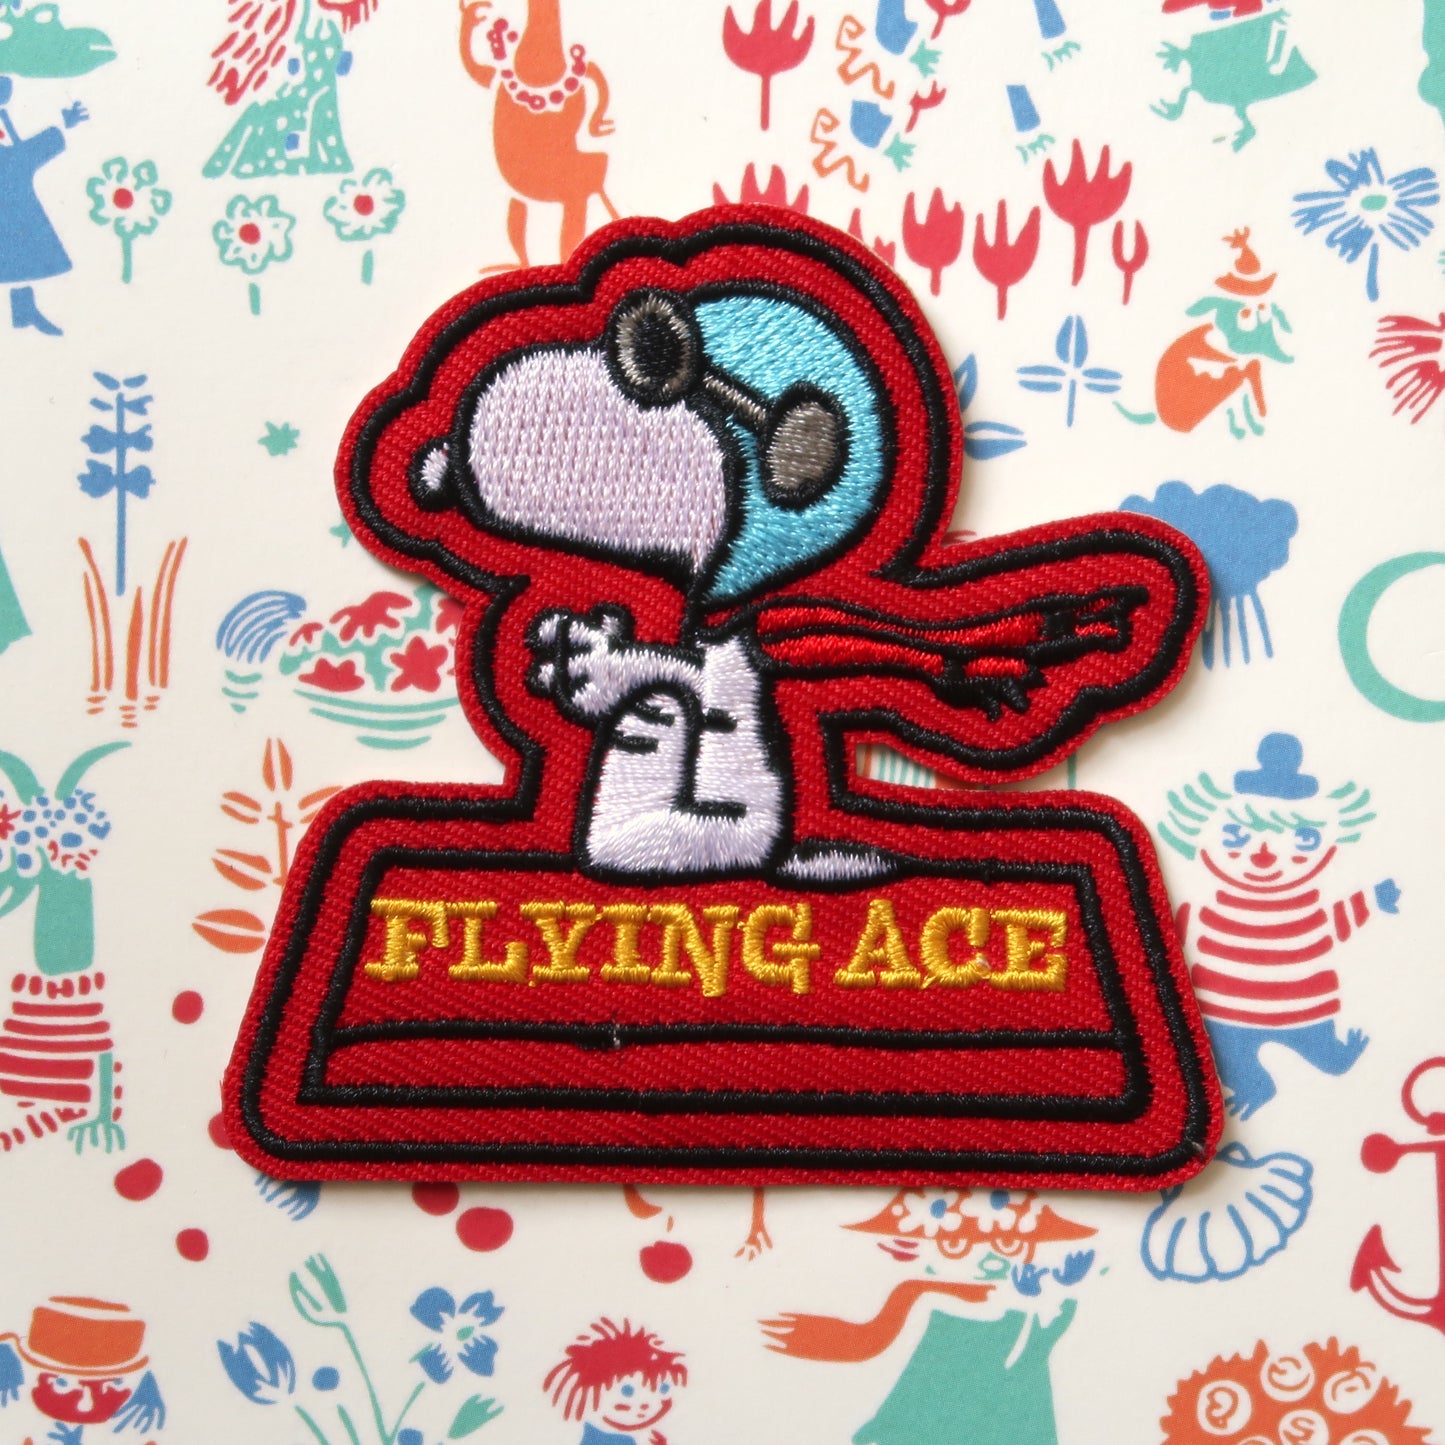 Snoopy Embroidery Patch // Pilot Flying Ace Snoopy Peanuts comics embroidered patch badge appliqué